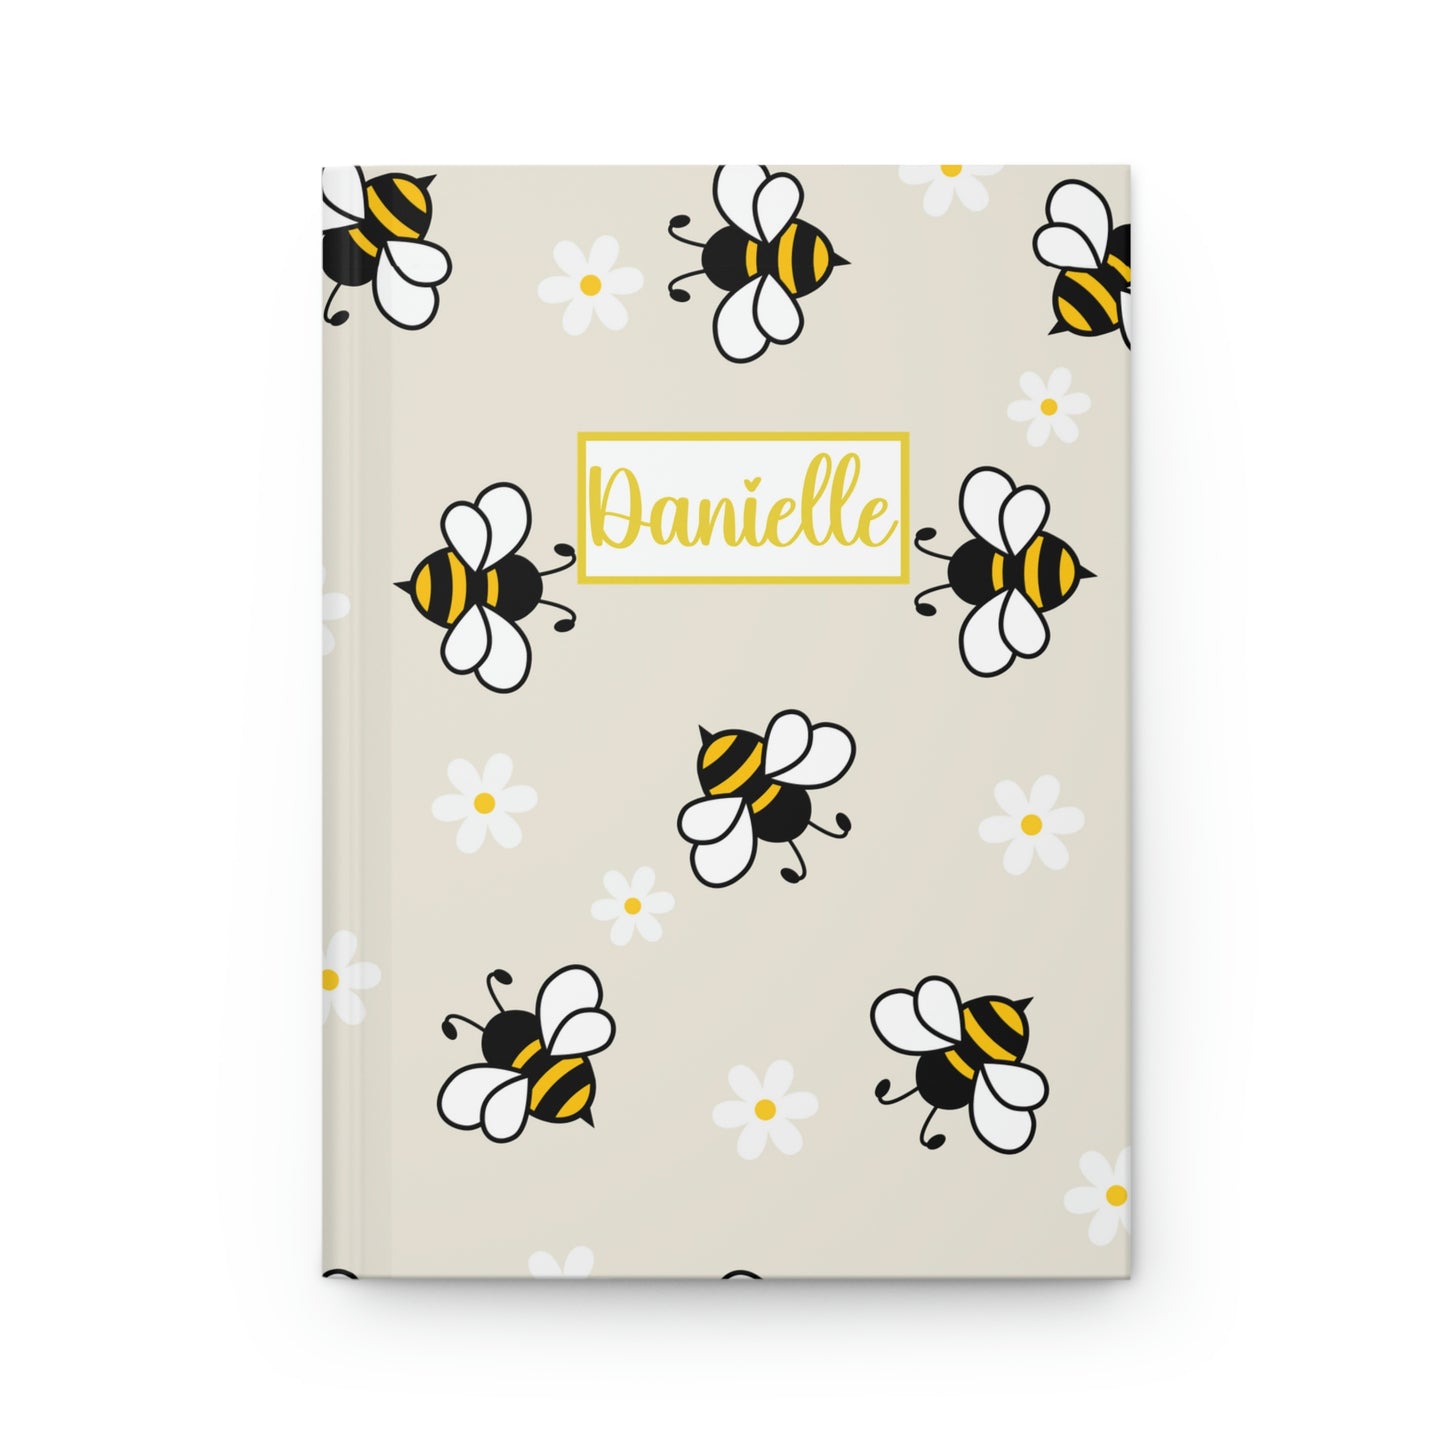 personalized honey bee and daisy journal. perfect gift for girls, teen girls or women for spring or summer writing.